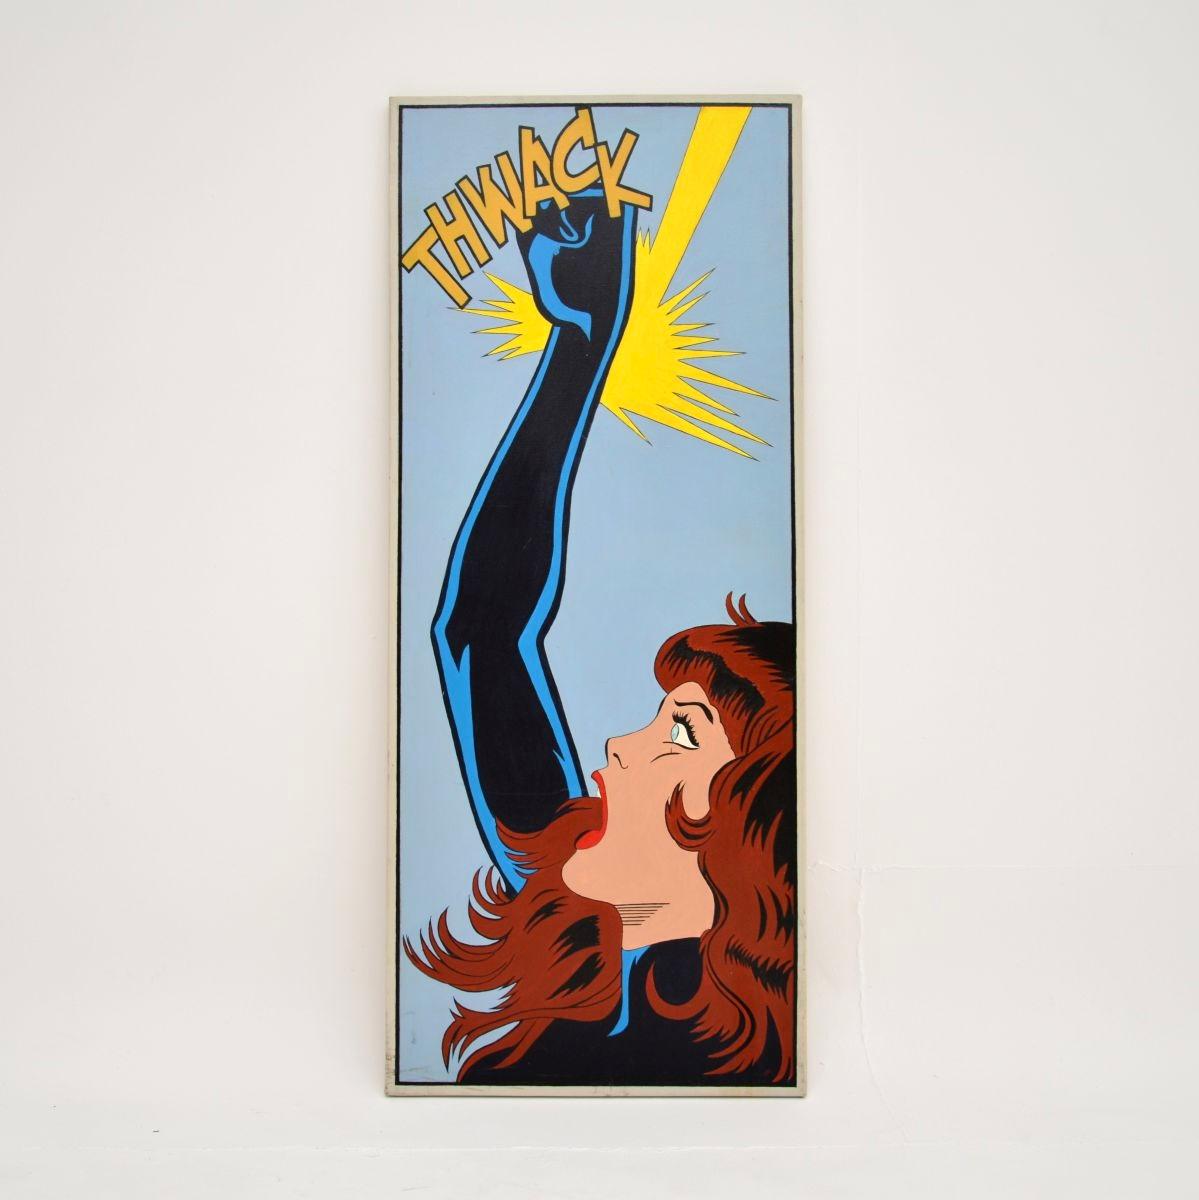 An amazing and unique set of three vintage comic strip oil paintings of The Black Widow. We would date these to around the 1970’s.

They are beautifully executed and are made to sit together as a comic strip, depicting a scene from Marvel’s Black